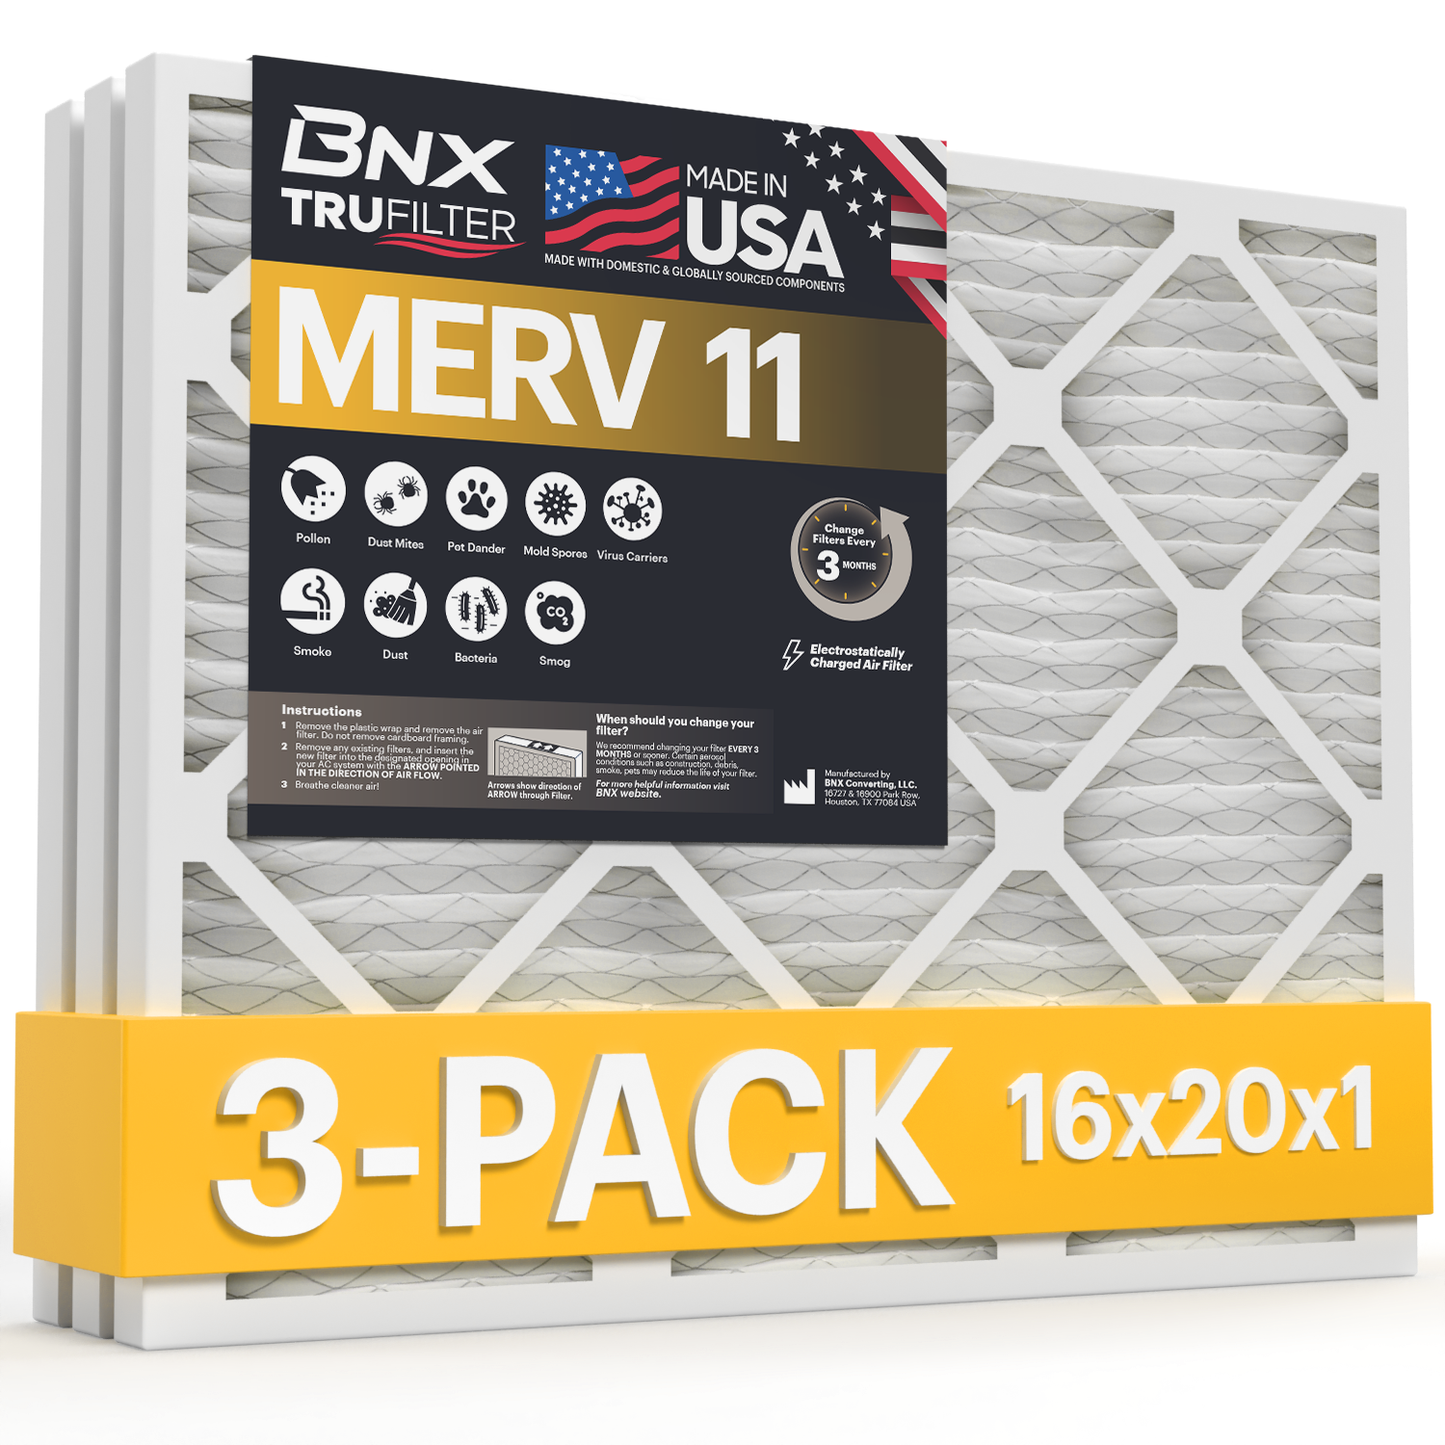 BNX 16x20x1 MERV 11 Air Filter 3 Pack - MADE IN USA - Electrostatic Pleated Air Conditioner HVAC AC Furnace Filters - Removes Dust, Mold, Pollen, Lint, Pet Dander, Smoke, Smog